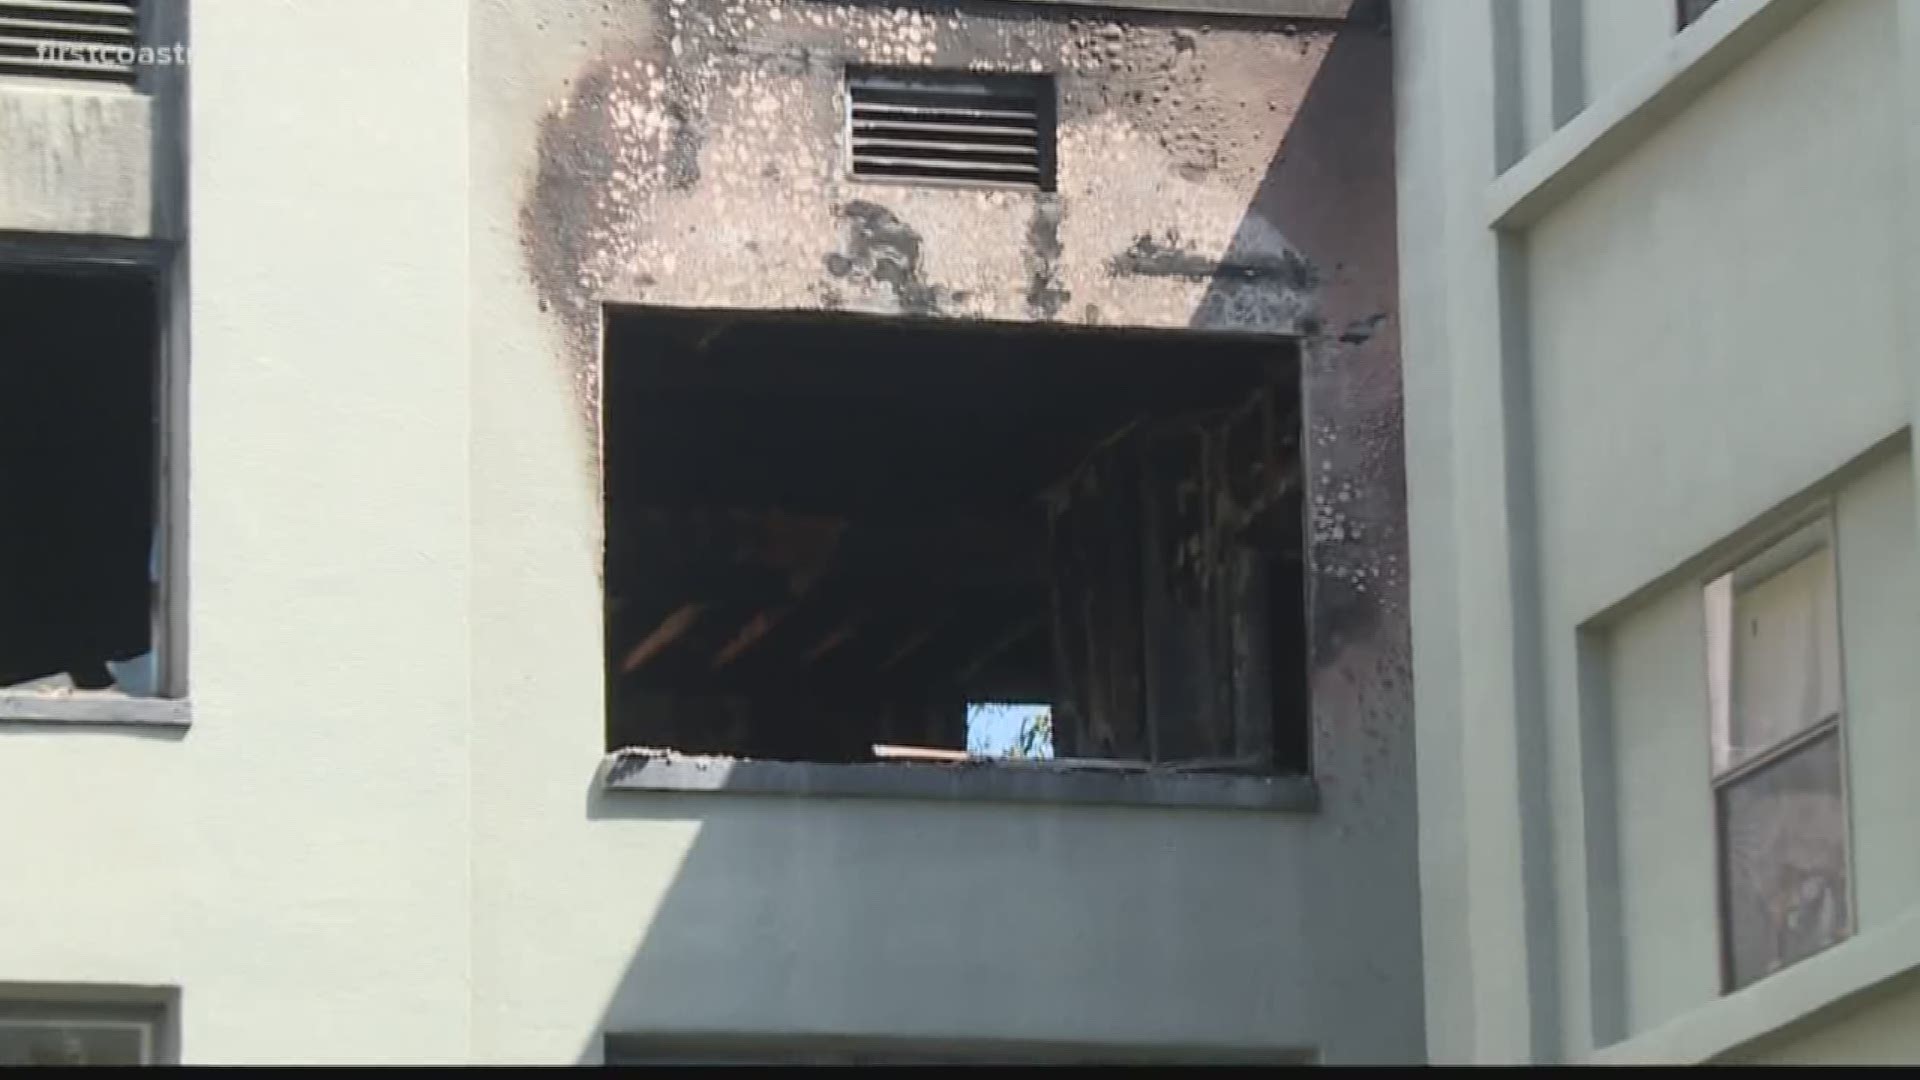 The fire at Frances Court broke out Wednesday morning, displacing 18 people.